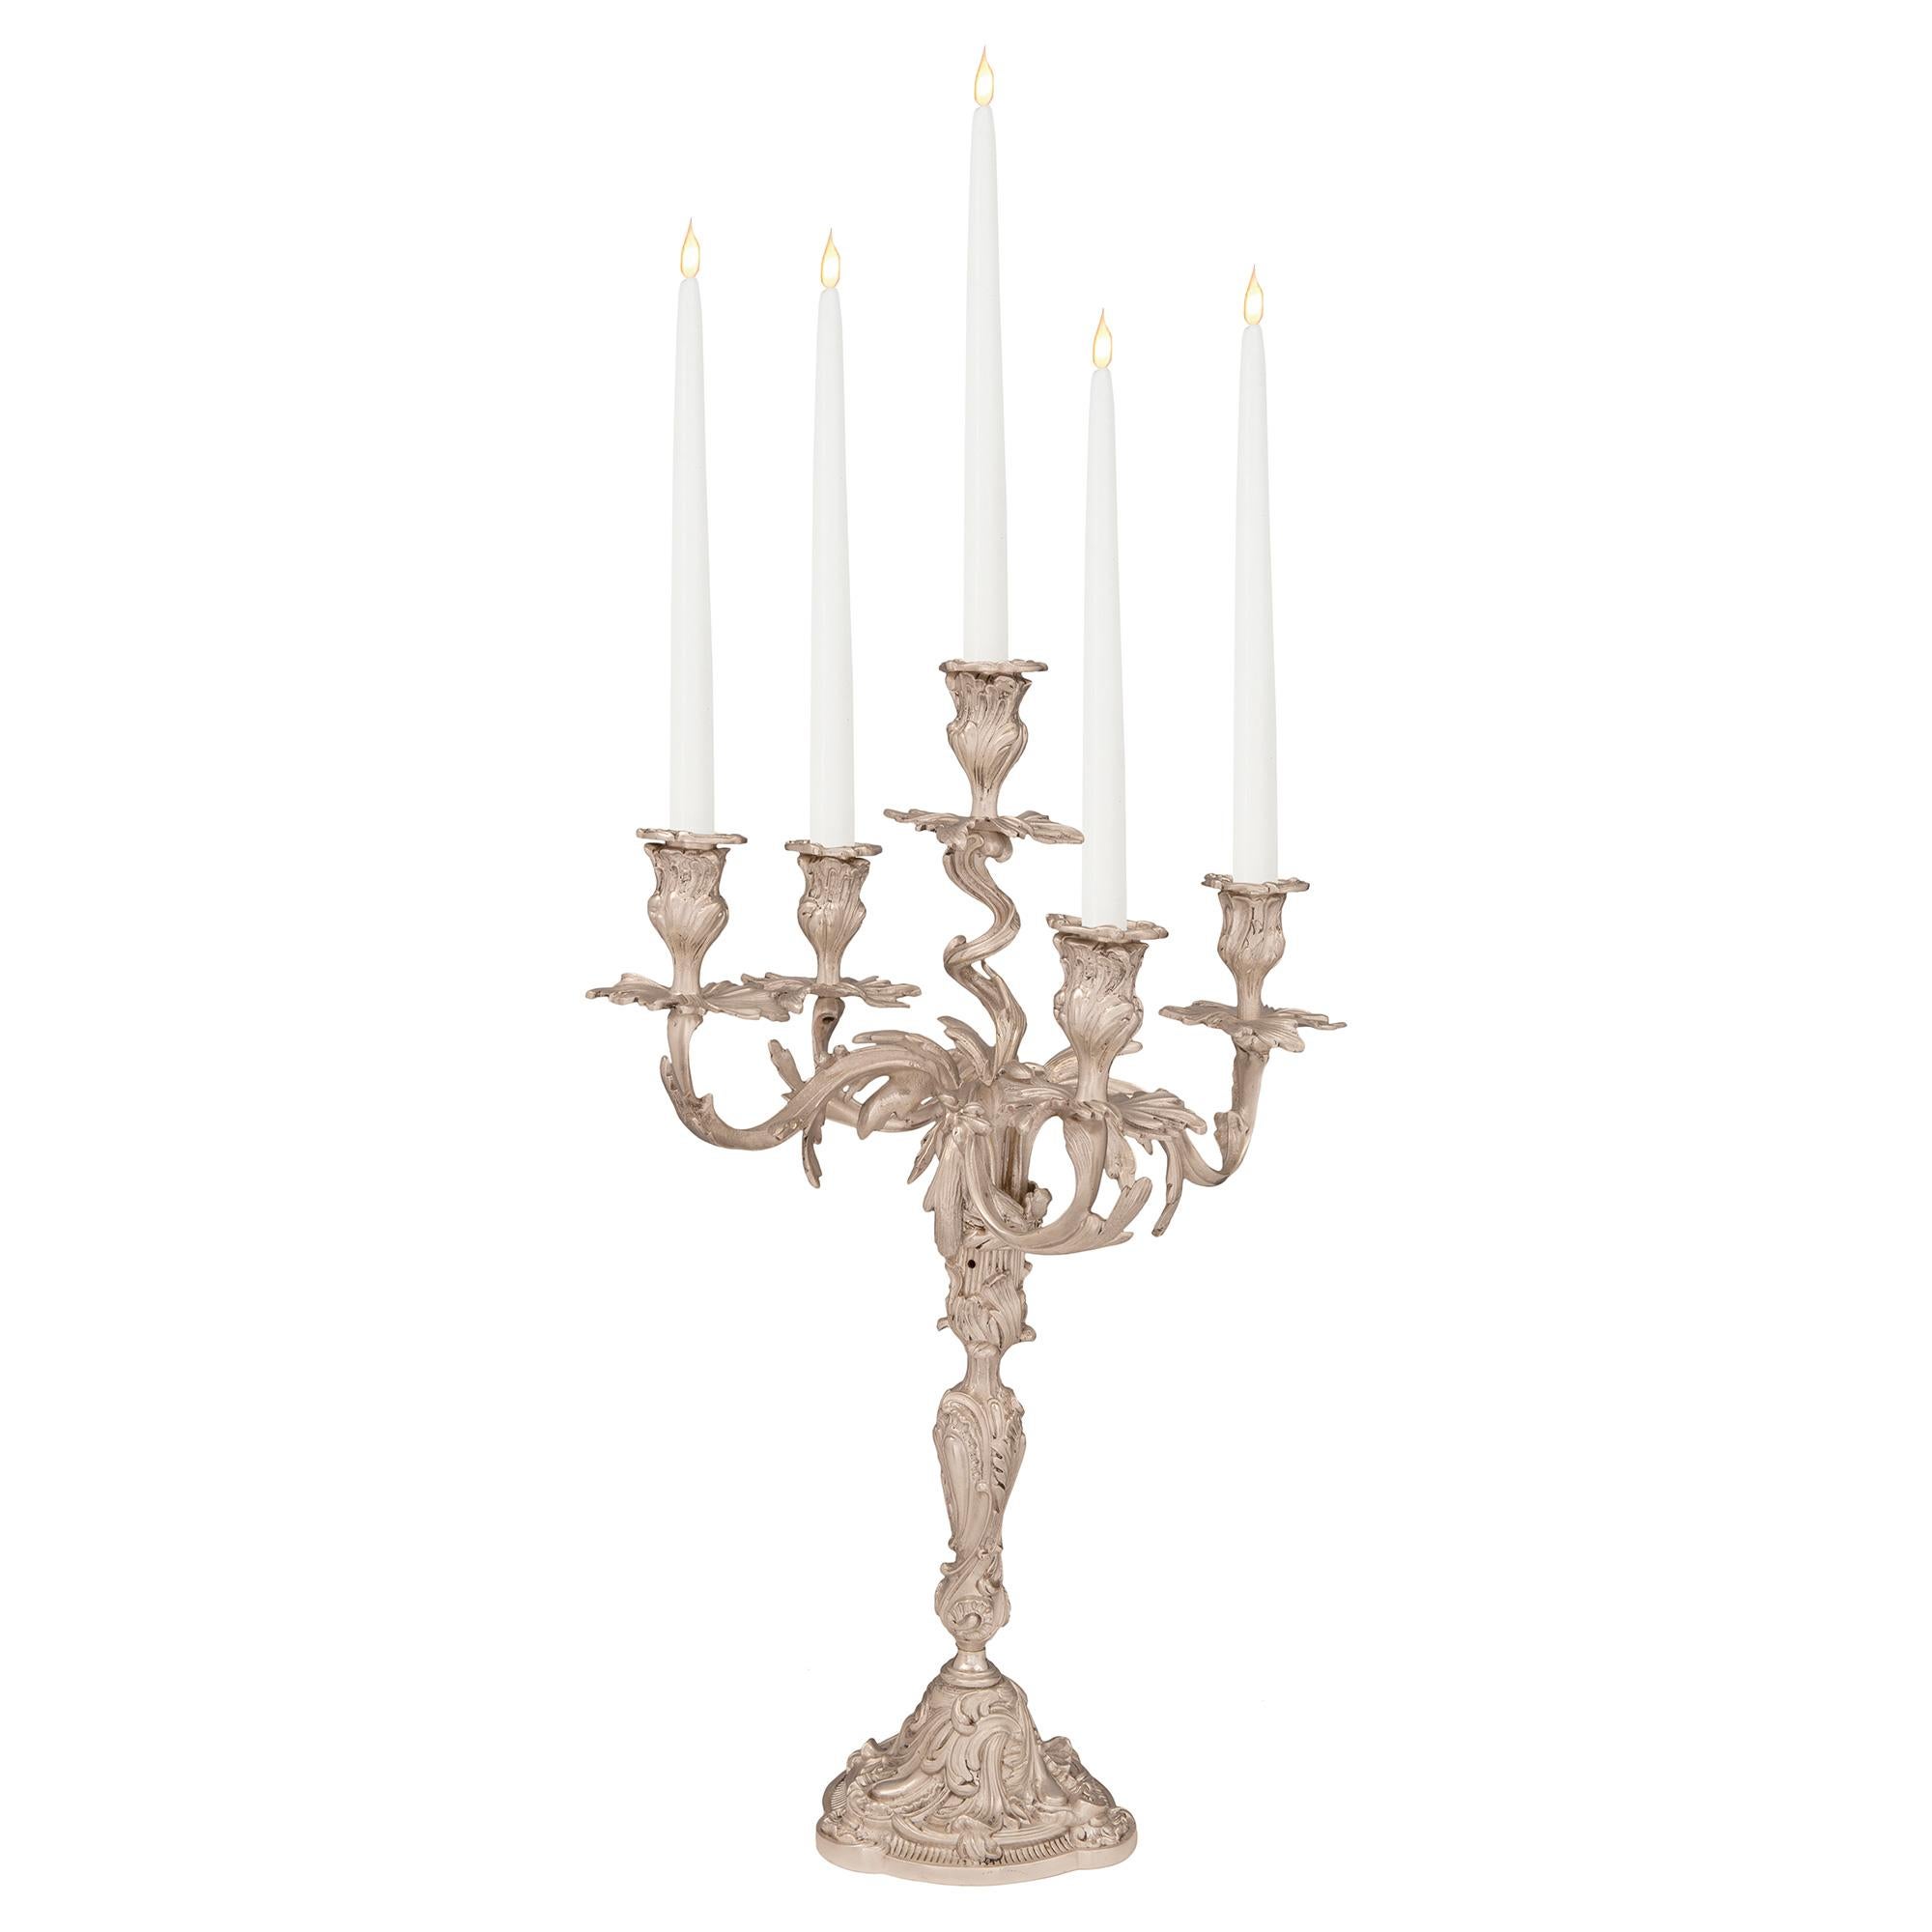 An impressive and large scaled pair of French mid 19th century Louis XV st. Silvered bronze five-arm candelabras. Each candelabra is raised by a circular base with richly chased scrolls, acanthus leaves and smooth cabochons. The central futs display